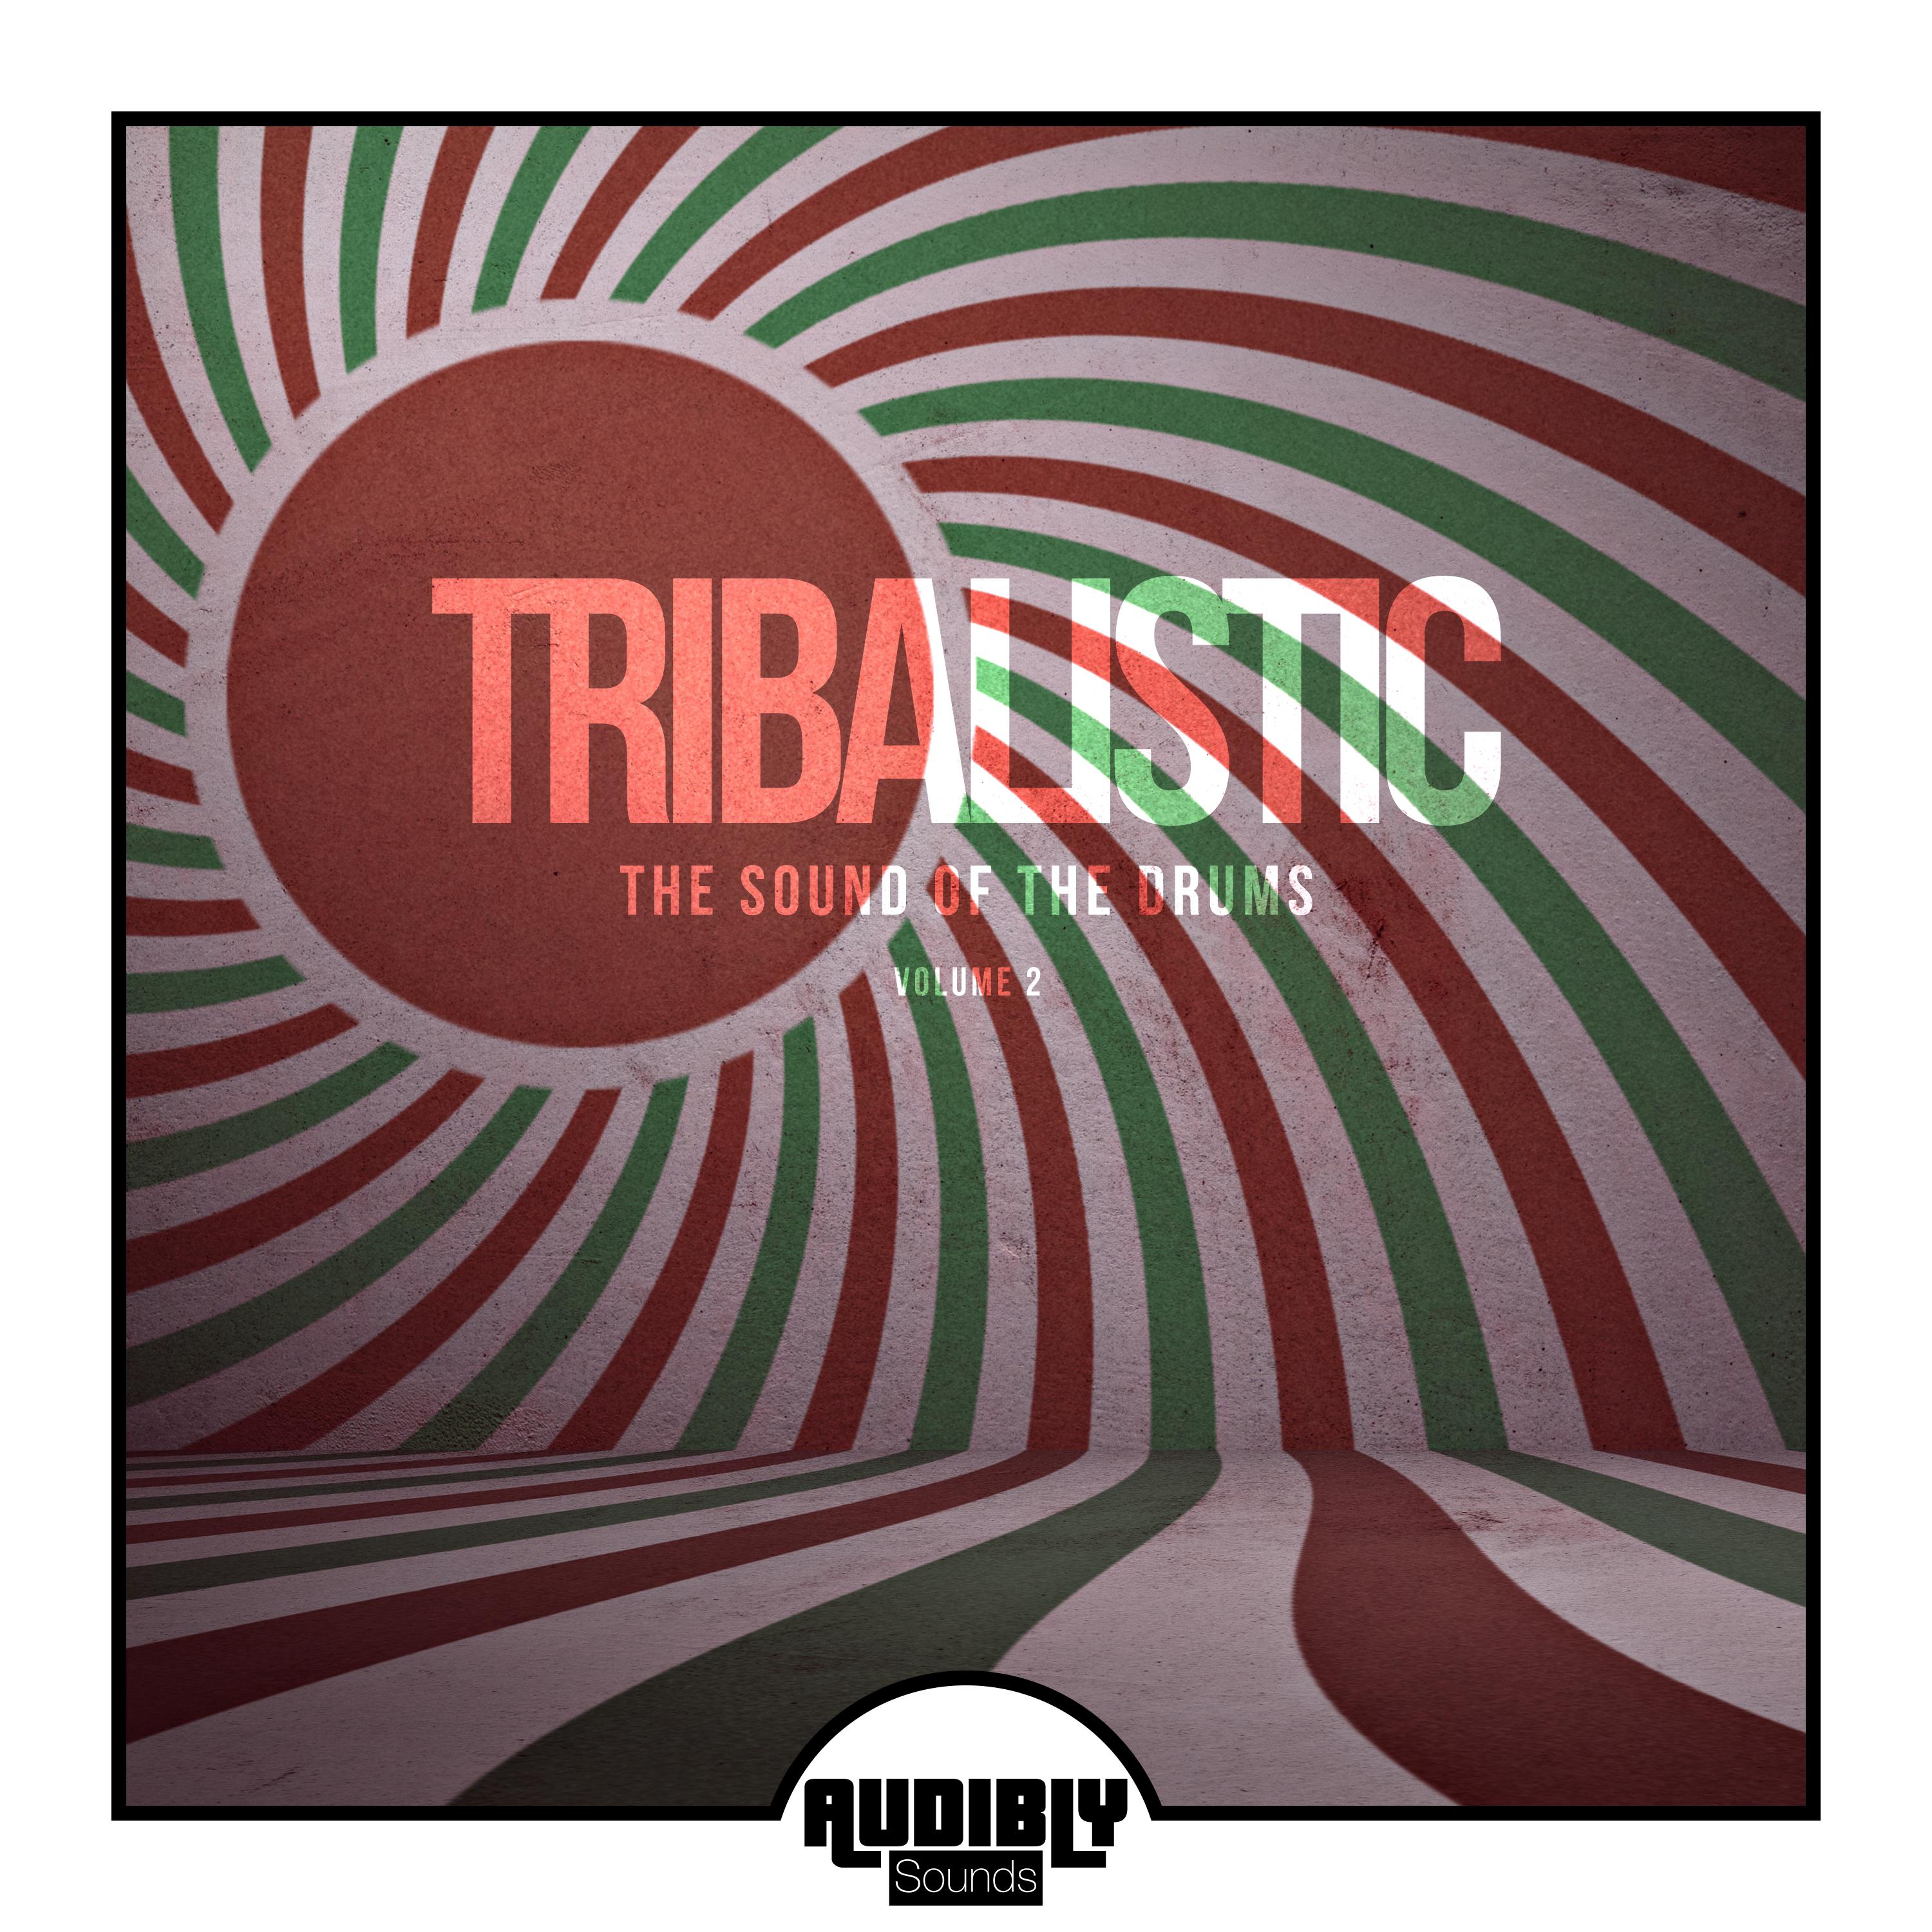 Tribalistic, Vol. 2 (The Sound of the Drums)